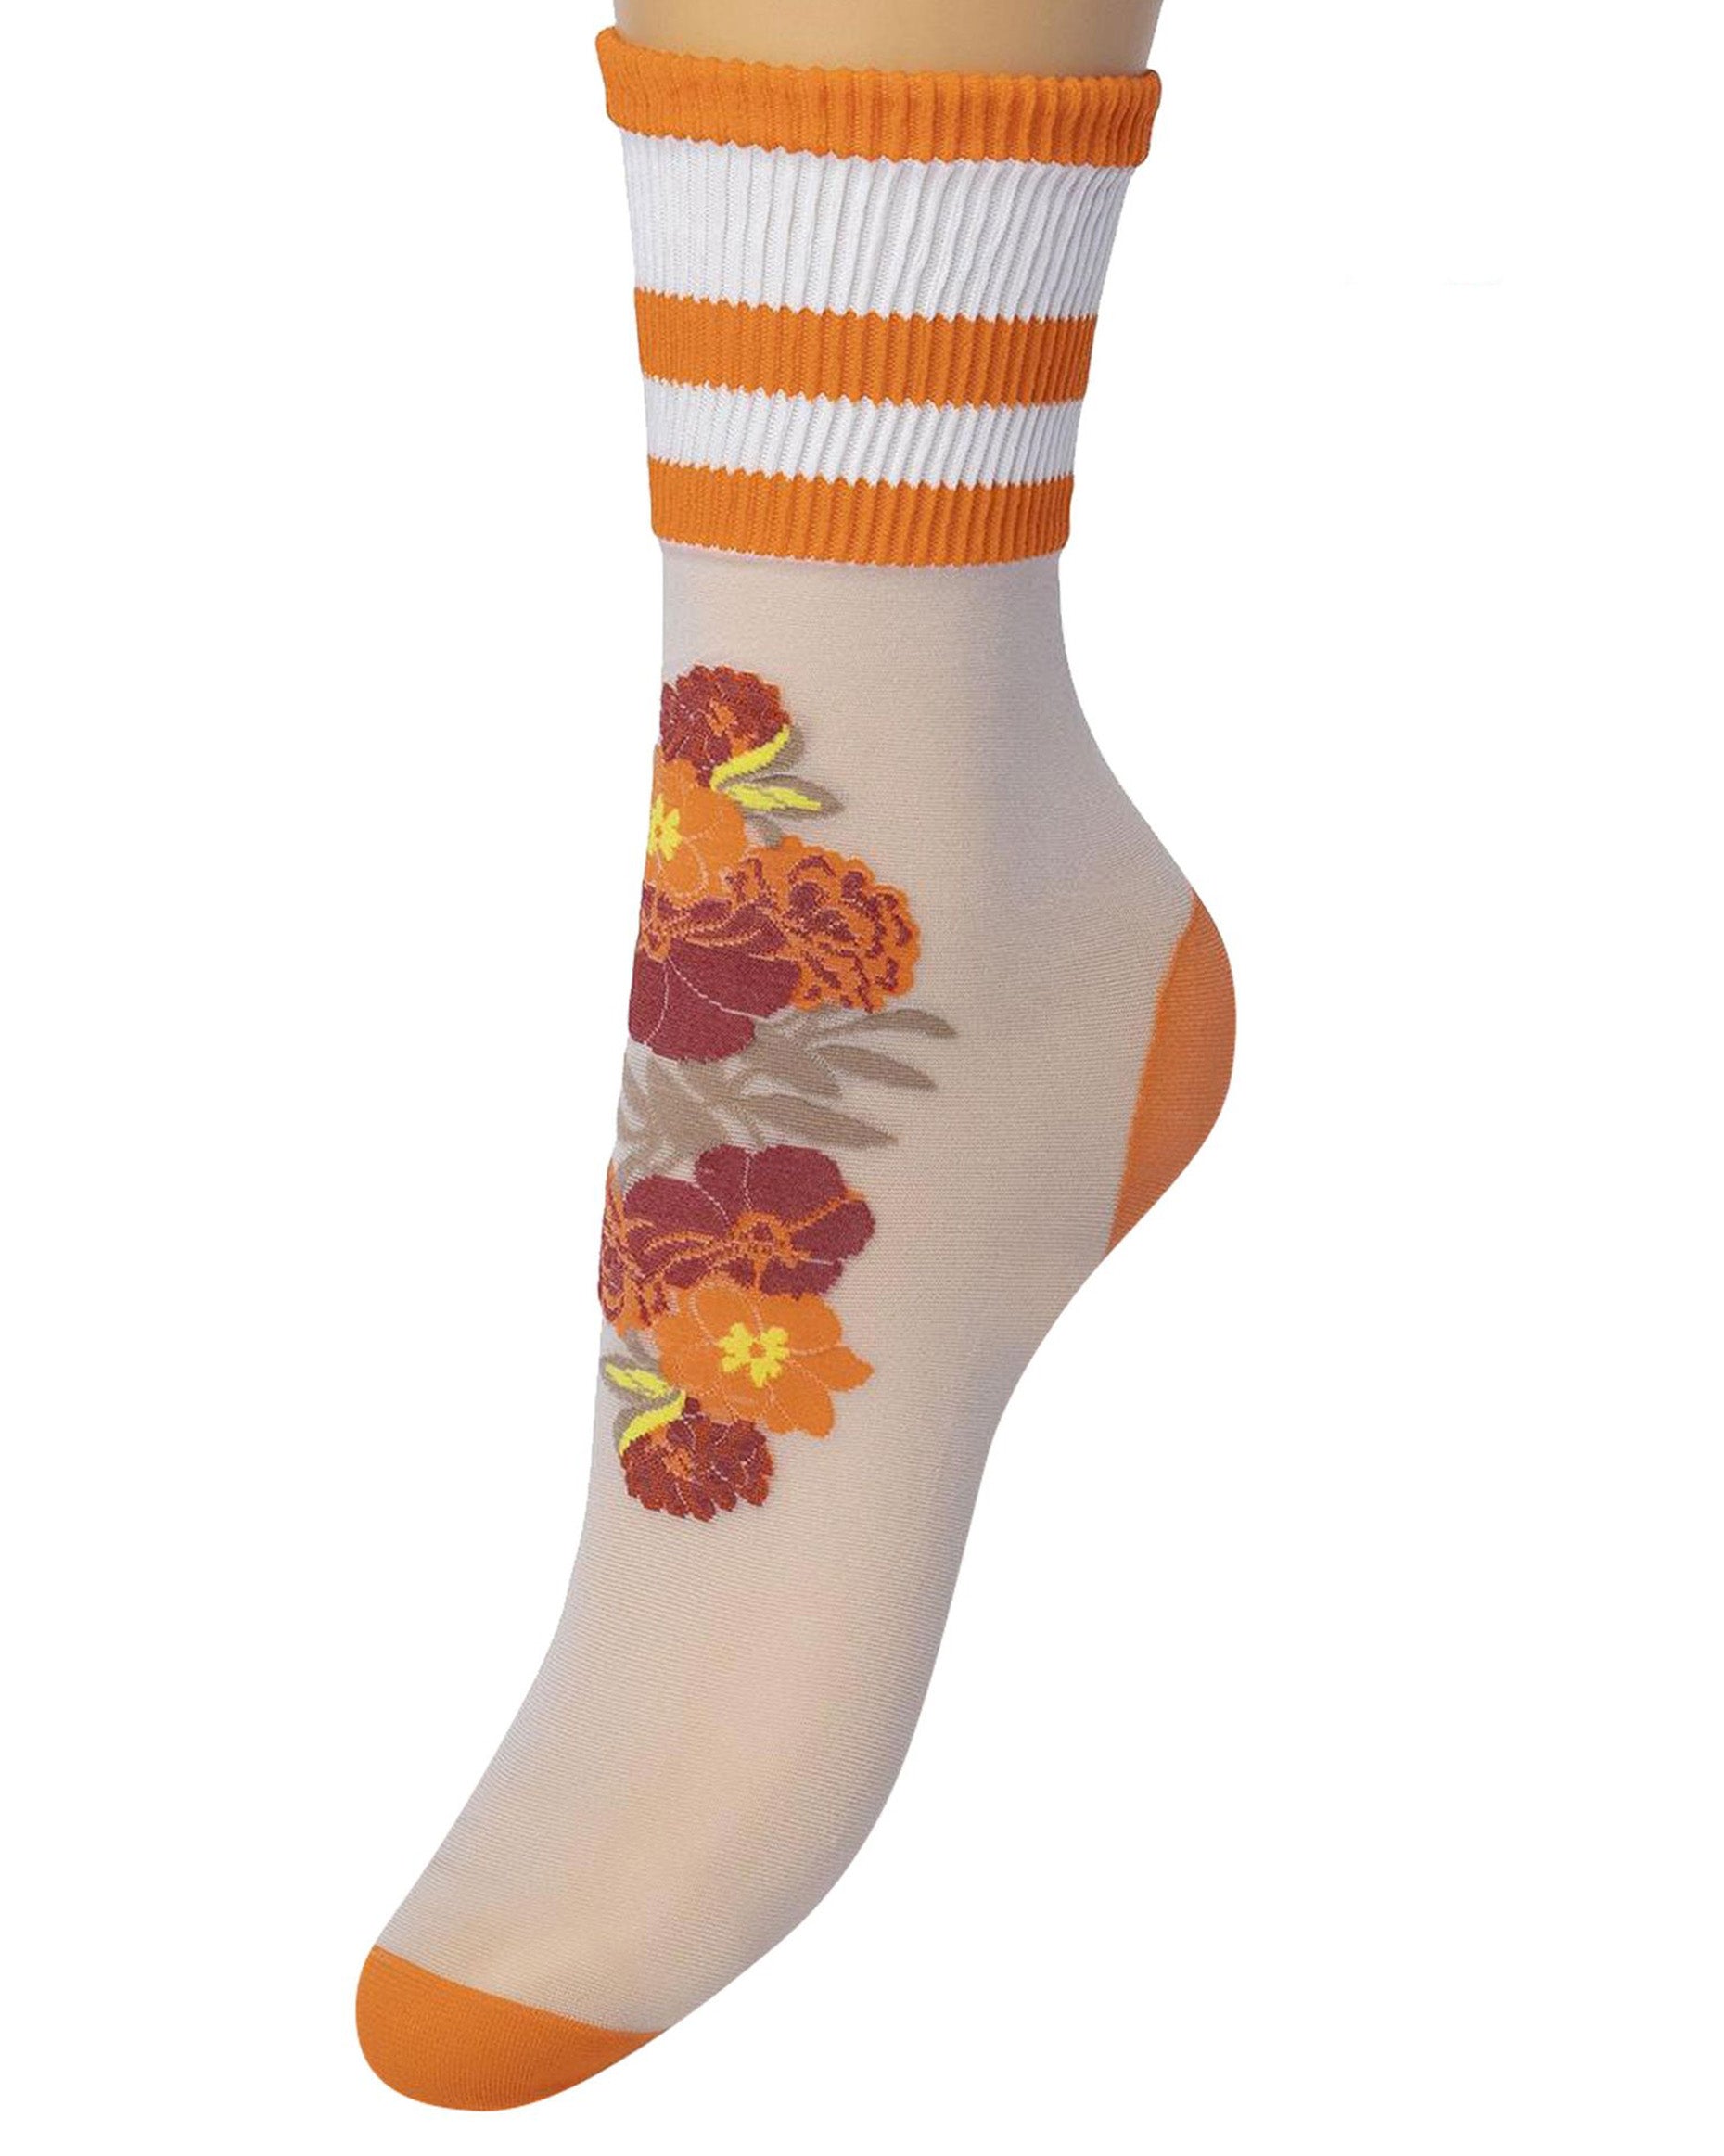 Bonnie Doon Sporty Flower Sock - sheer white fashion ankle socks with a woven floral motif in red, orange and yellow and deep white elasticated cuff with three orange sports style stripes.